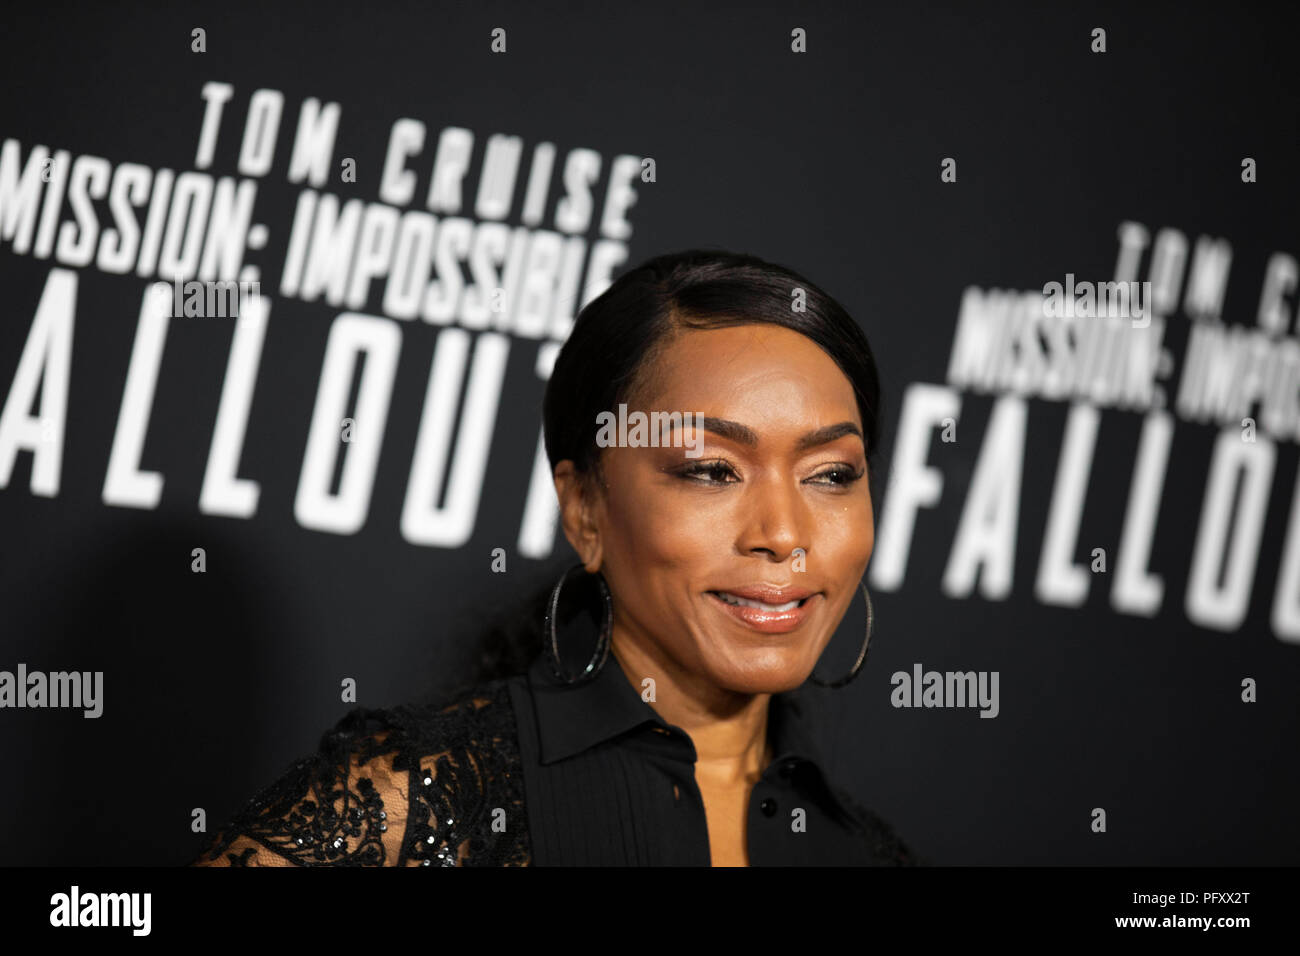 Actress Angela Bassett on the red carpet prior to a screening of Mission Impossible Fallout a the Smithsonian National Air and Space Museum on July 22, in Washington, DC. Stock Photo